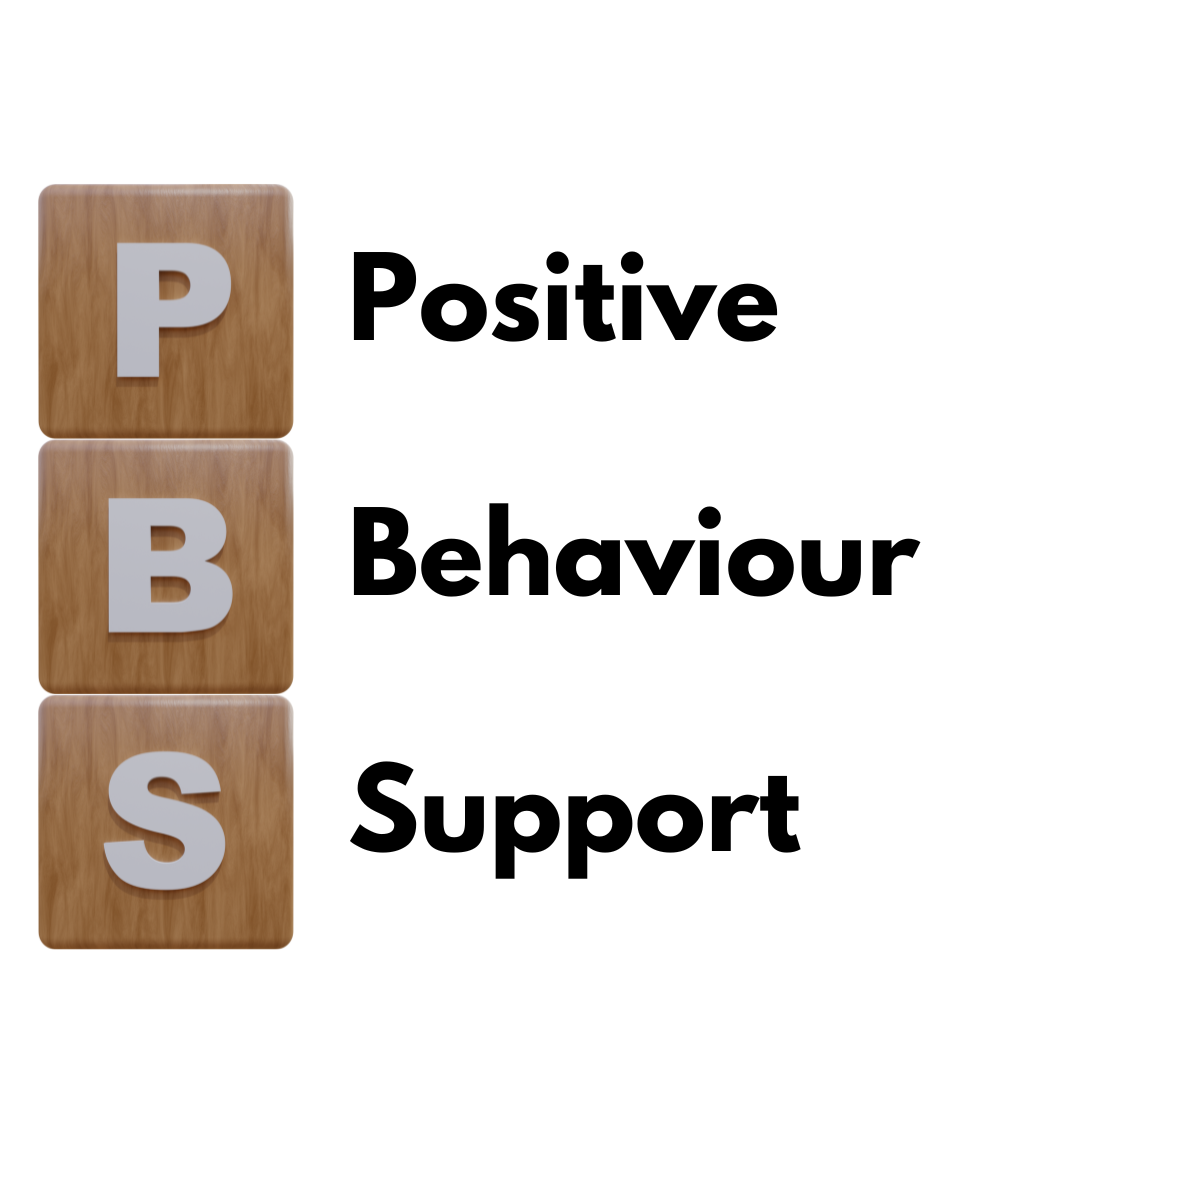 Three wooden blocks with the letters p, b, and s stacked vertically with the text 